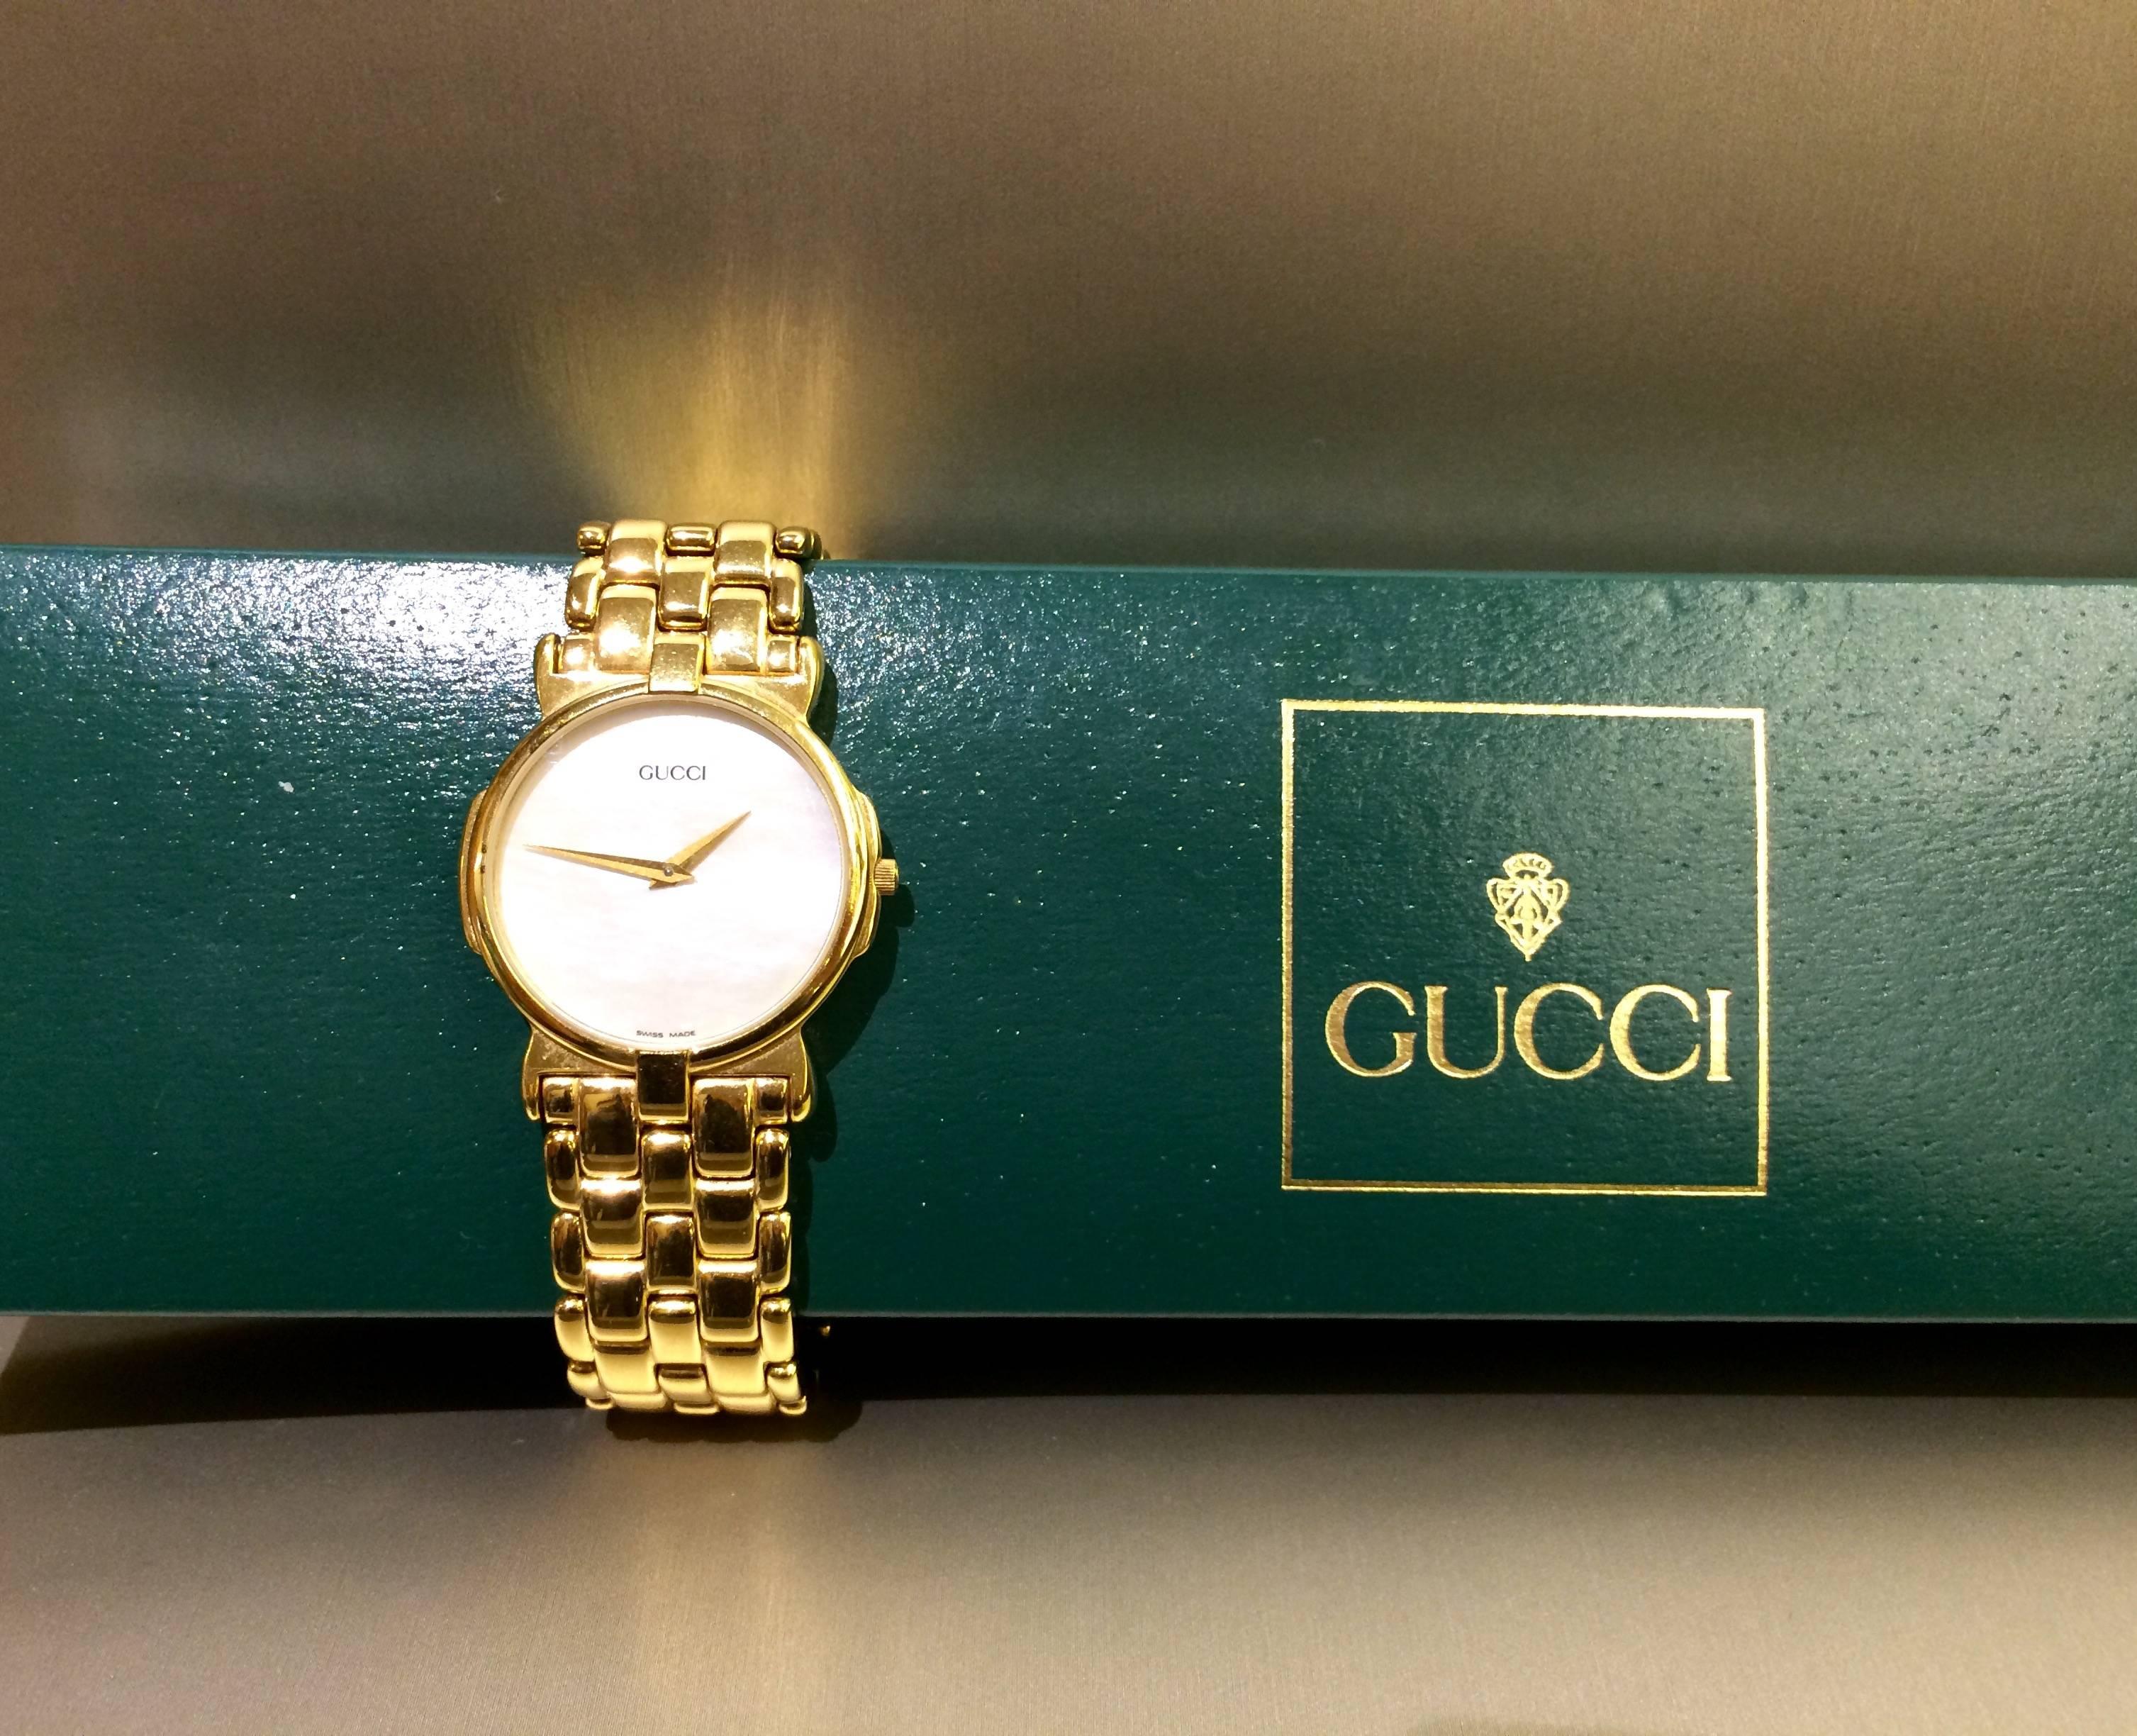 Gucci stainless steel watch plated yellow tone, mother of pearl dial, quartz movement. Comes with classic green Gucci box. Circa 1980's